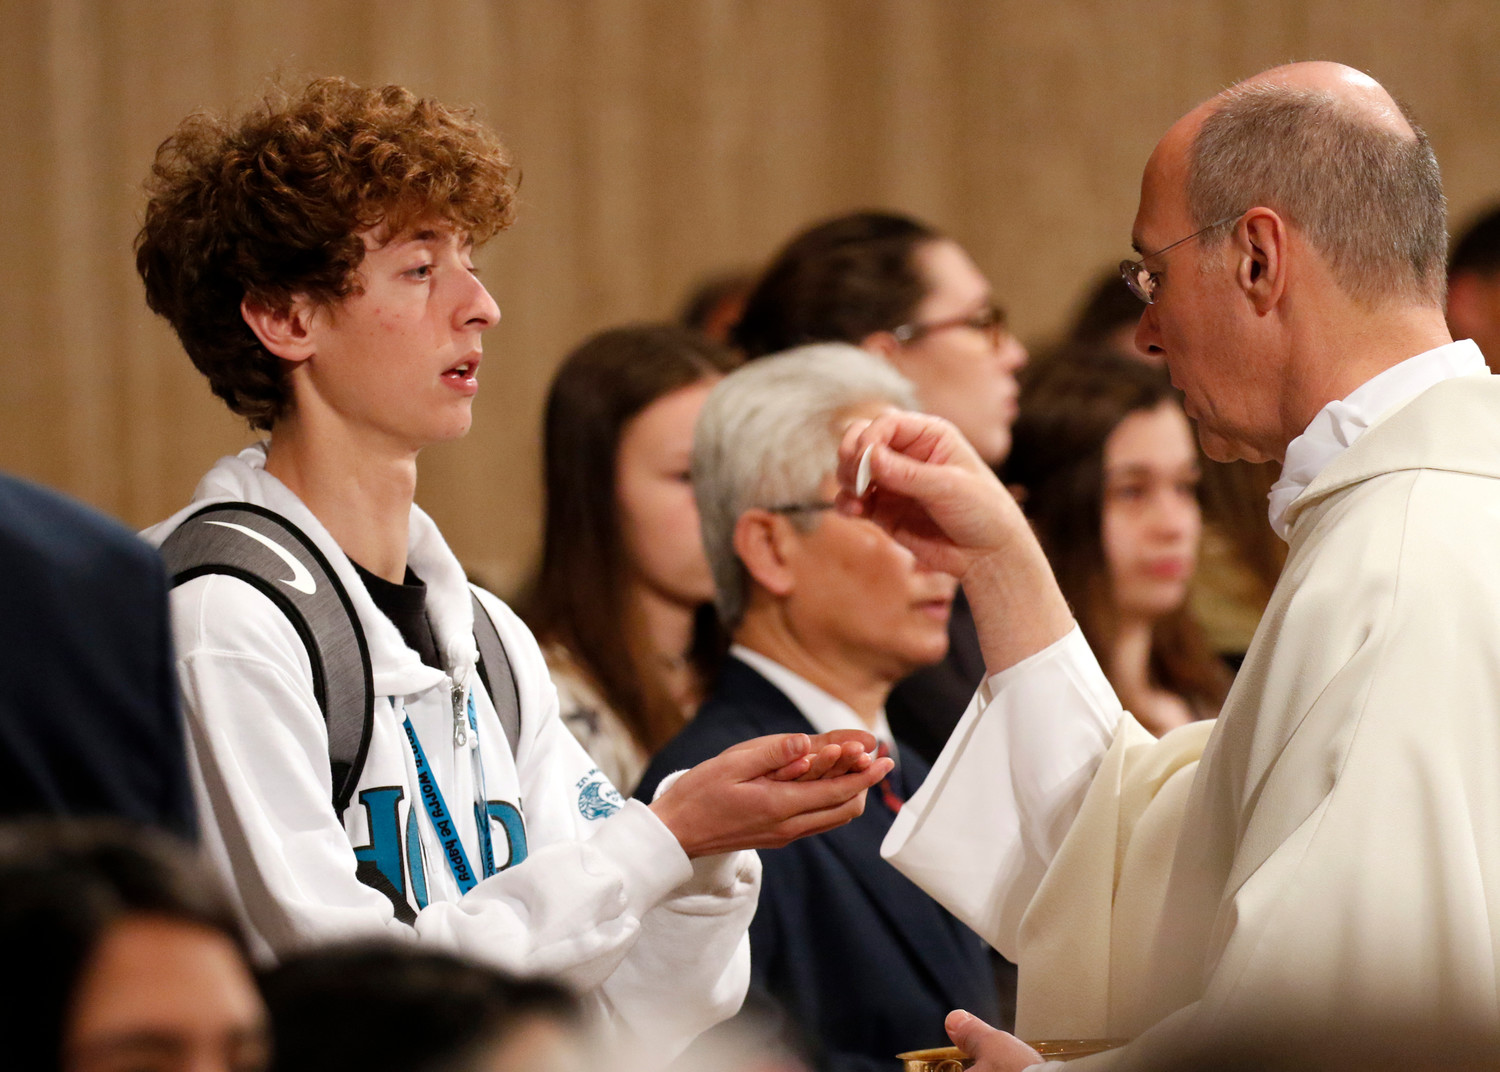 A young man receives Communion during the opening Mass of the National Prayer Vigil for Life Jan. 17 at the Basilica of the National Shrine of the Immaculate Conception in Washington.